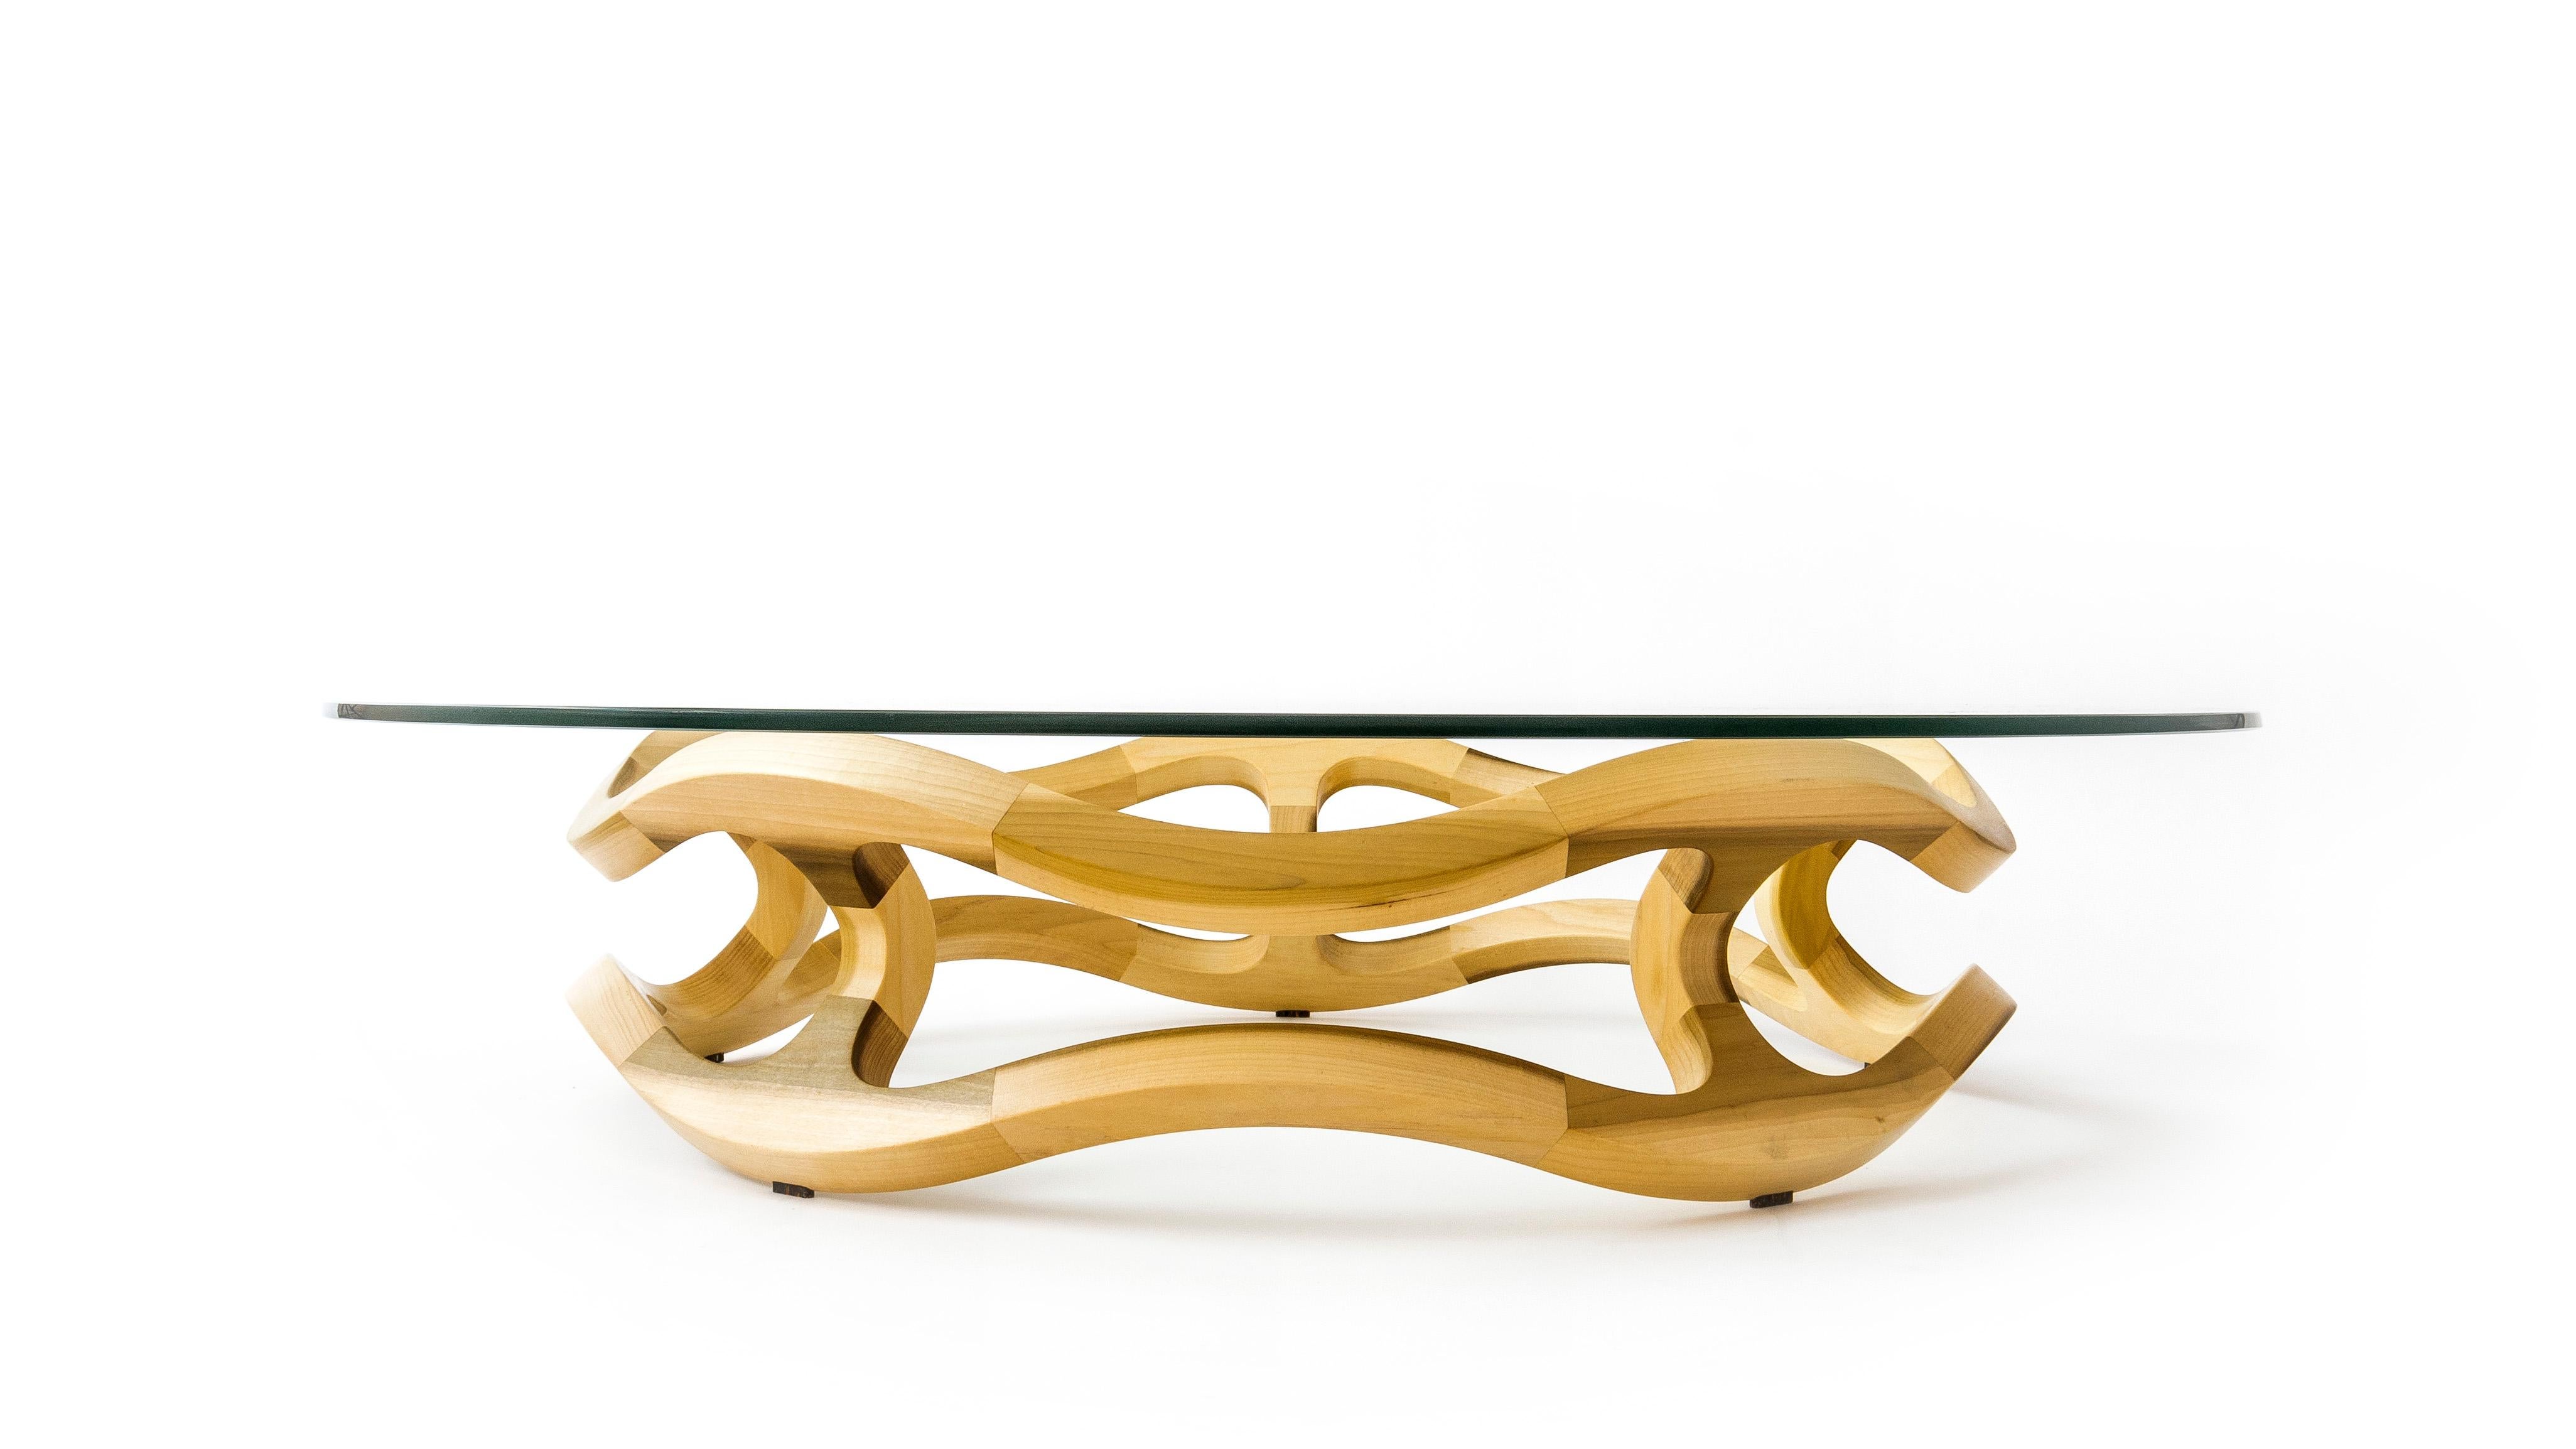 Flamenca, Geometric Sculptural Center Table Made of Solid Wood by Pedro Cerisola For Sale 5